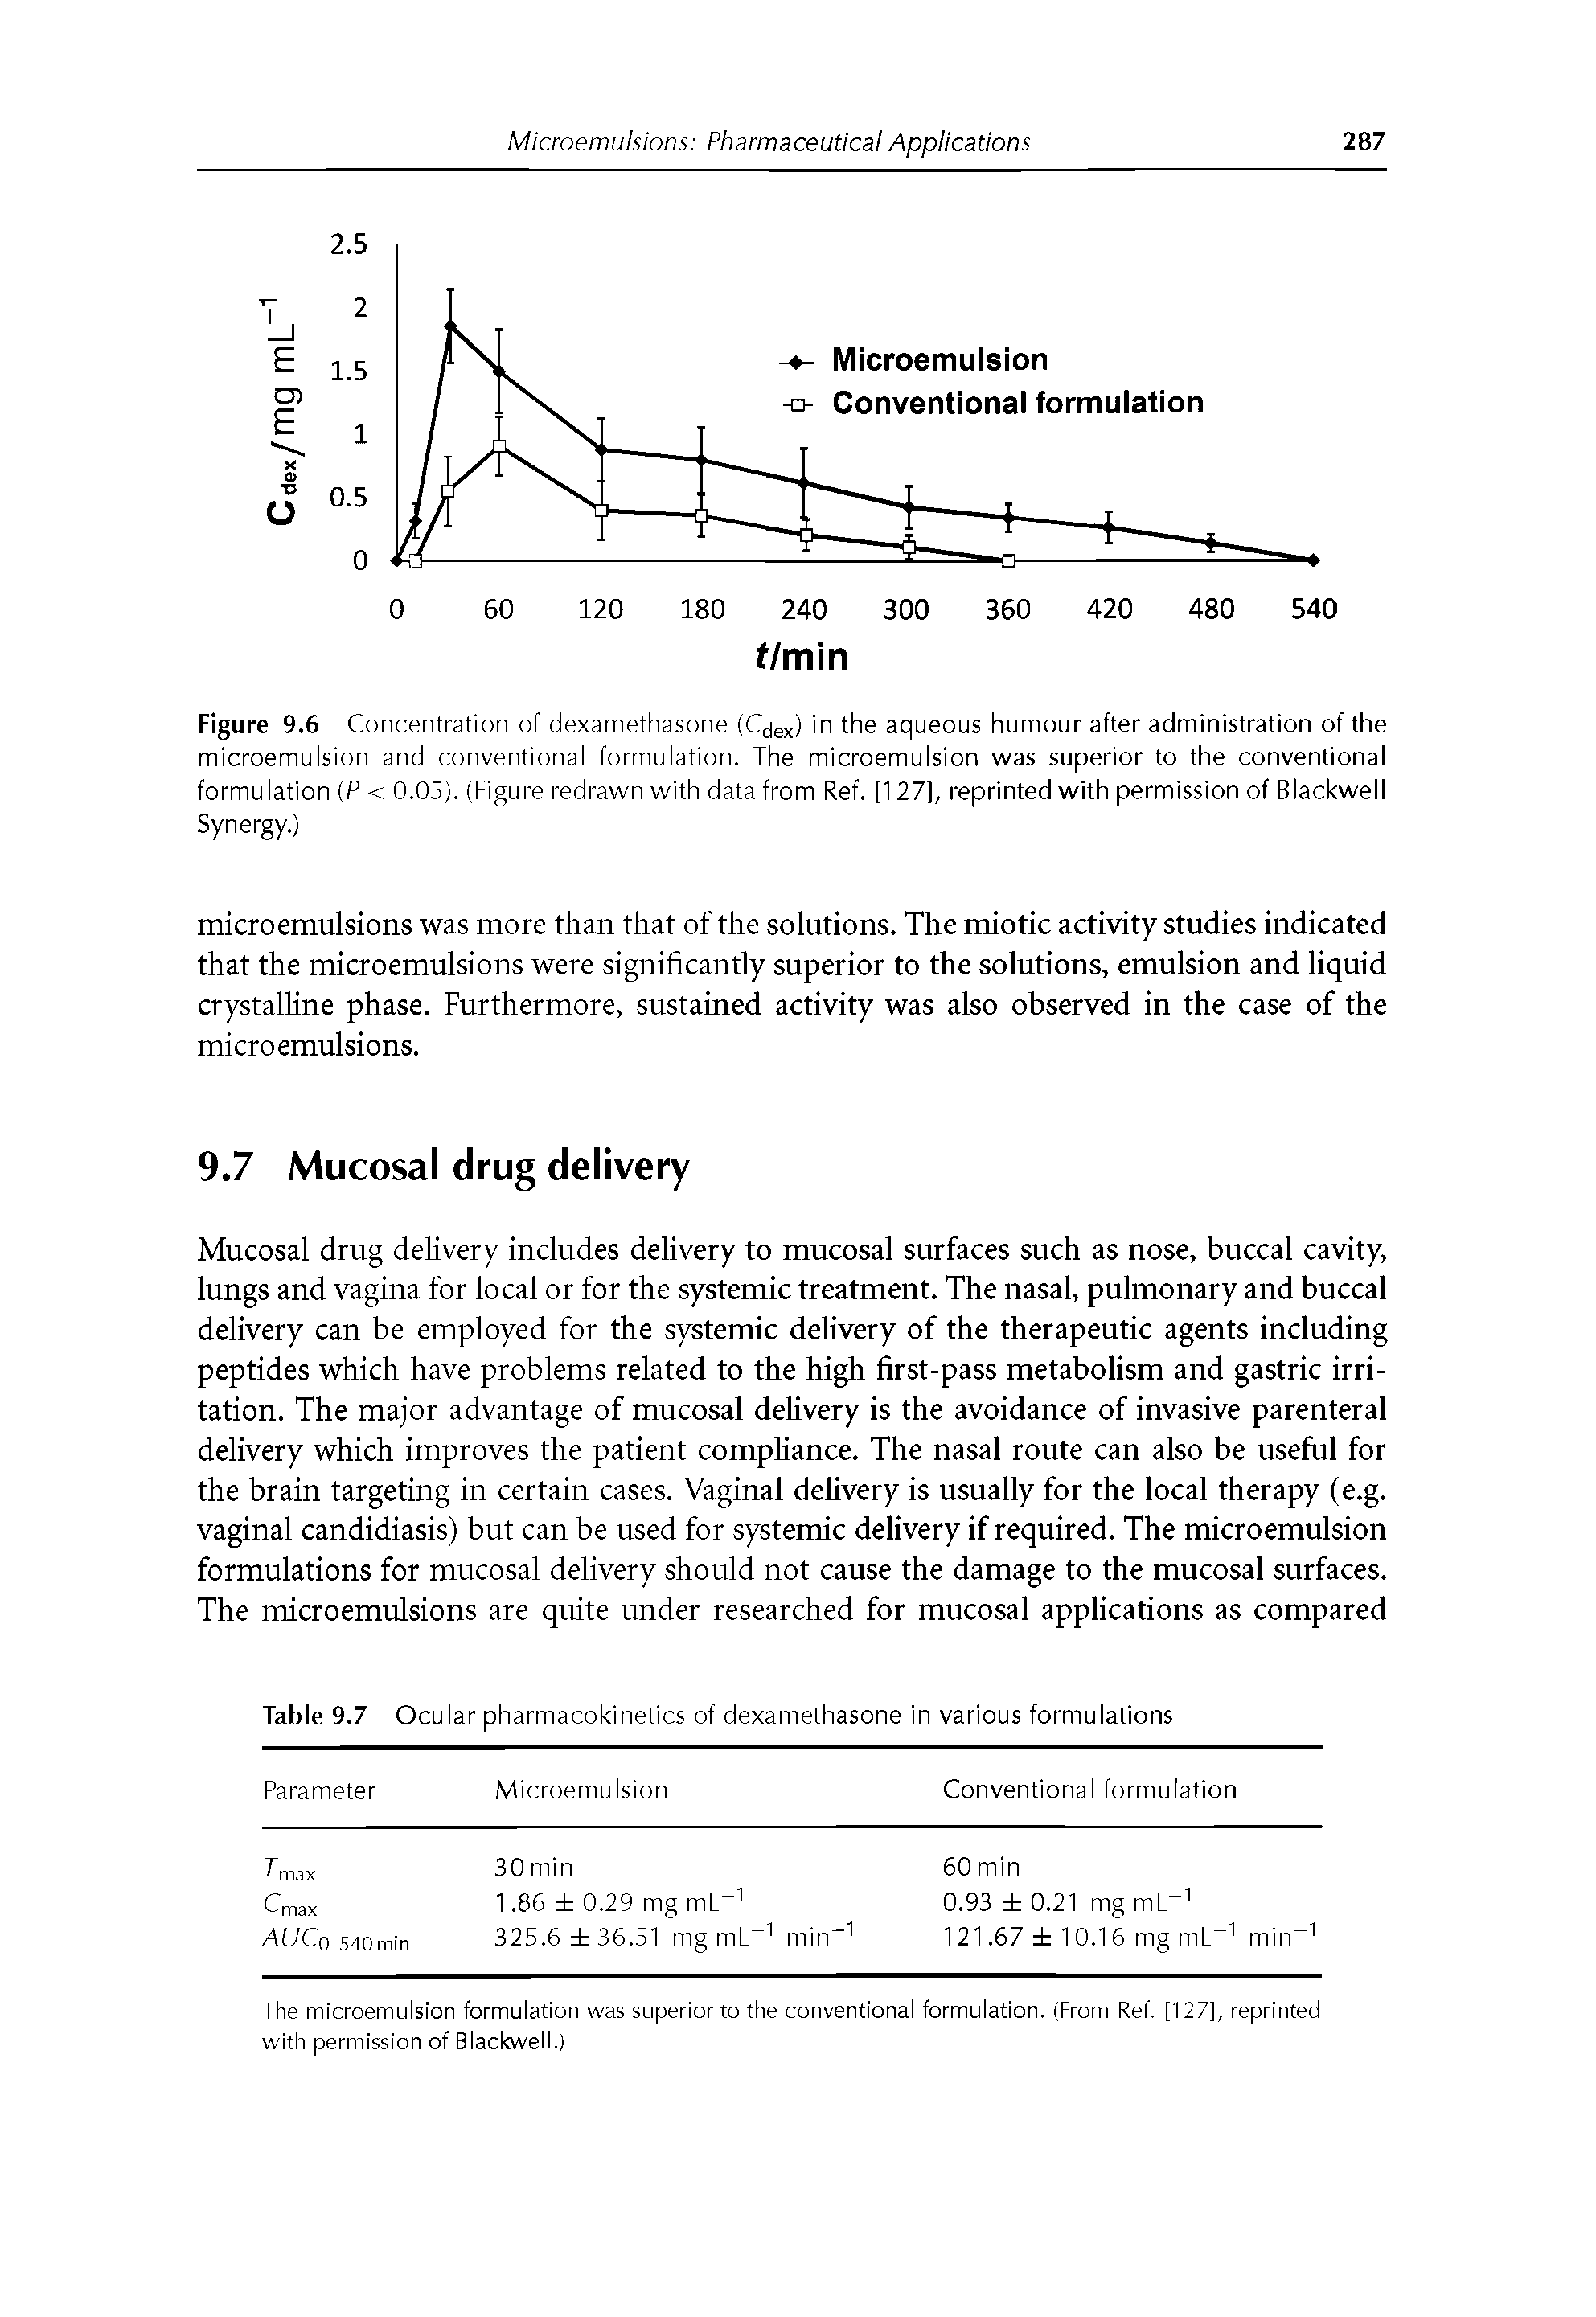 Figure 9.6 Concentration of dexamethasone (Qex) in the aqueous humour after administration of the microemulsion and conventional formulation. The microemulsion was superior to the conventional formulation (P < 0.05). (Figure redrawn with data from Ref. [127], reprinted with permission of Blackwell Synergy.)...